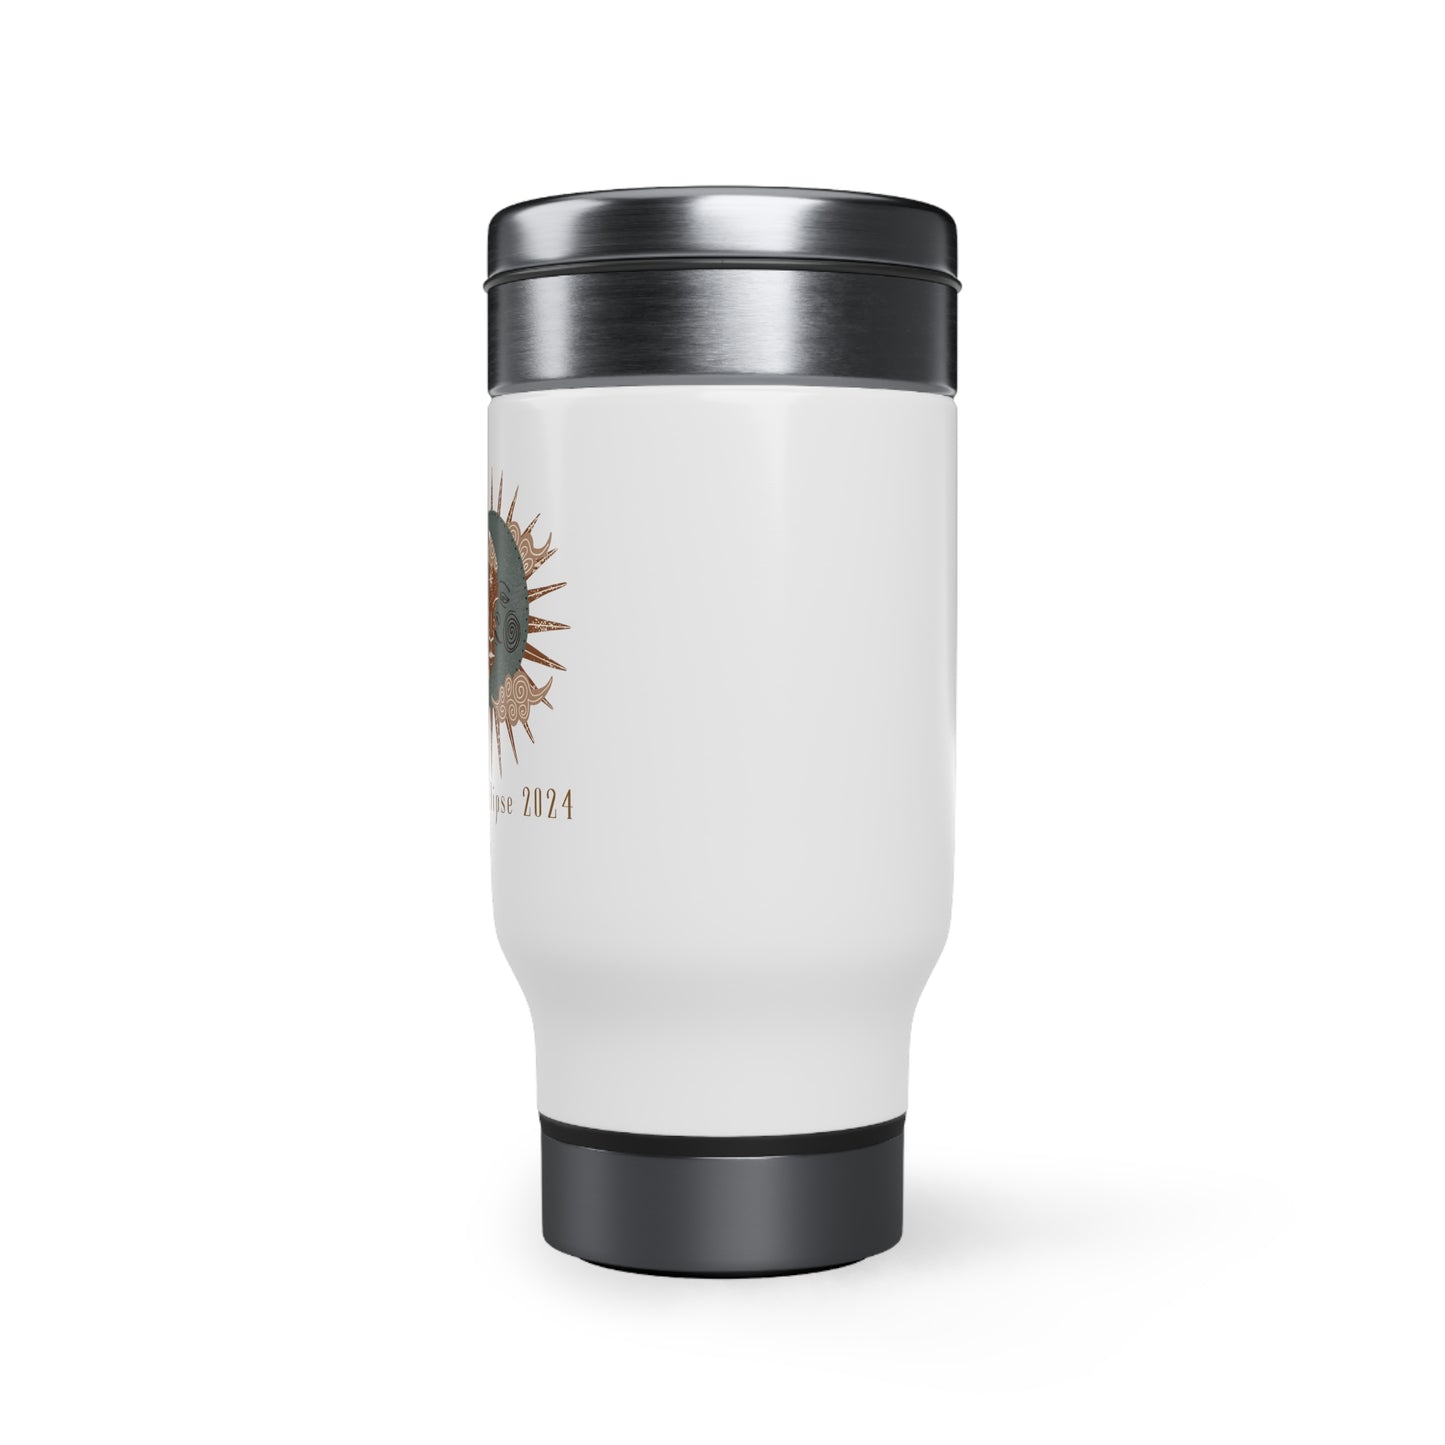 Solar Eclipse Stainless Steel Travel Mug with Handle, 14oz